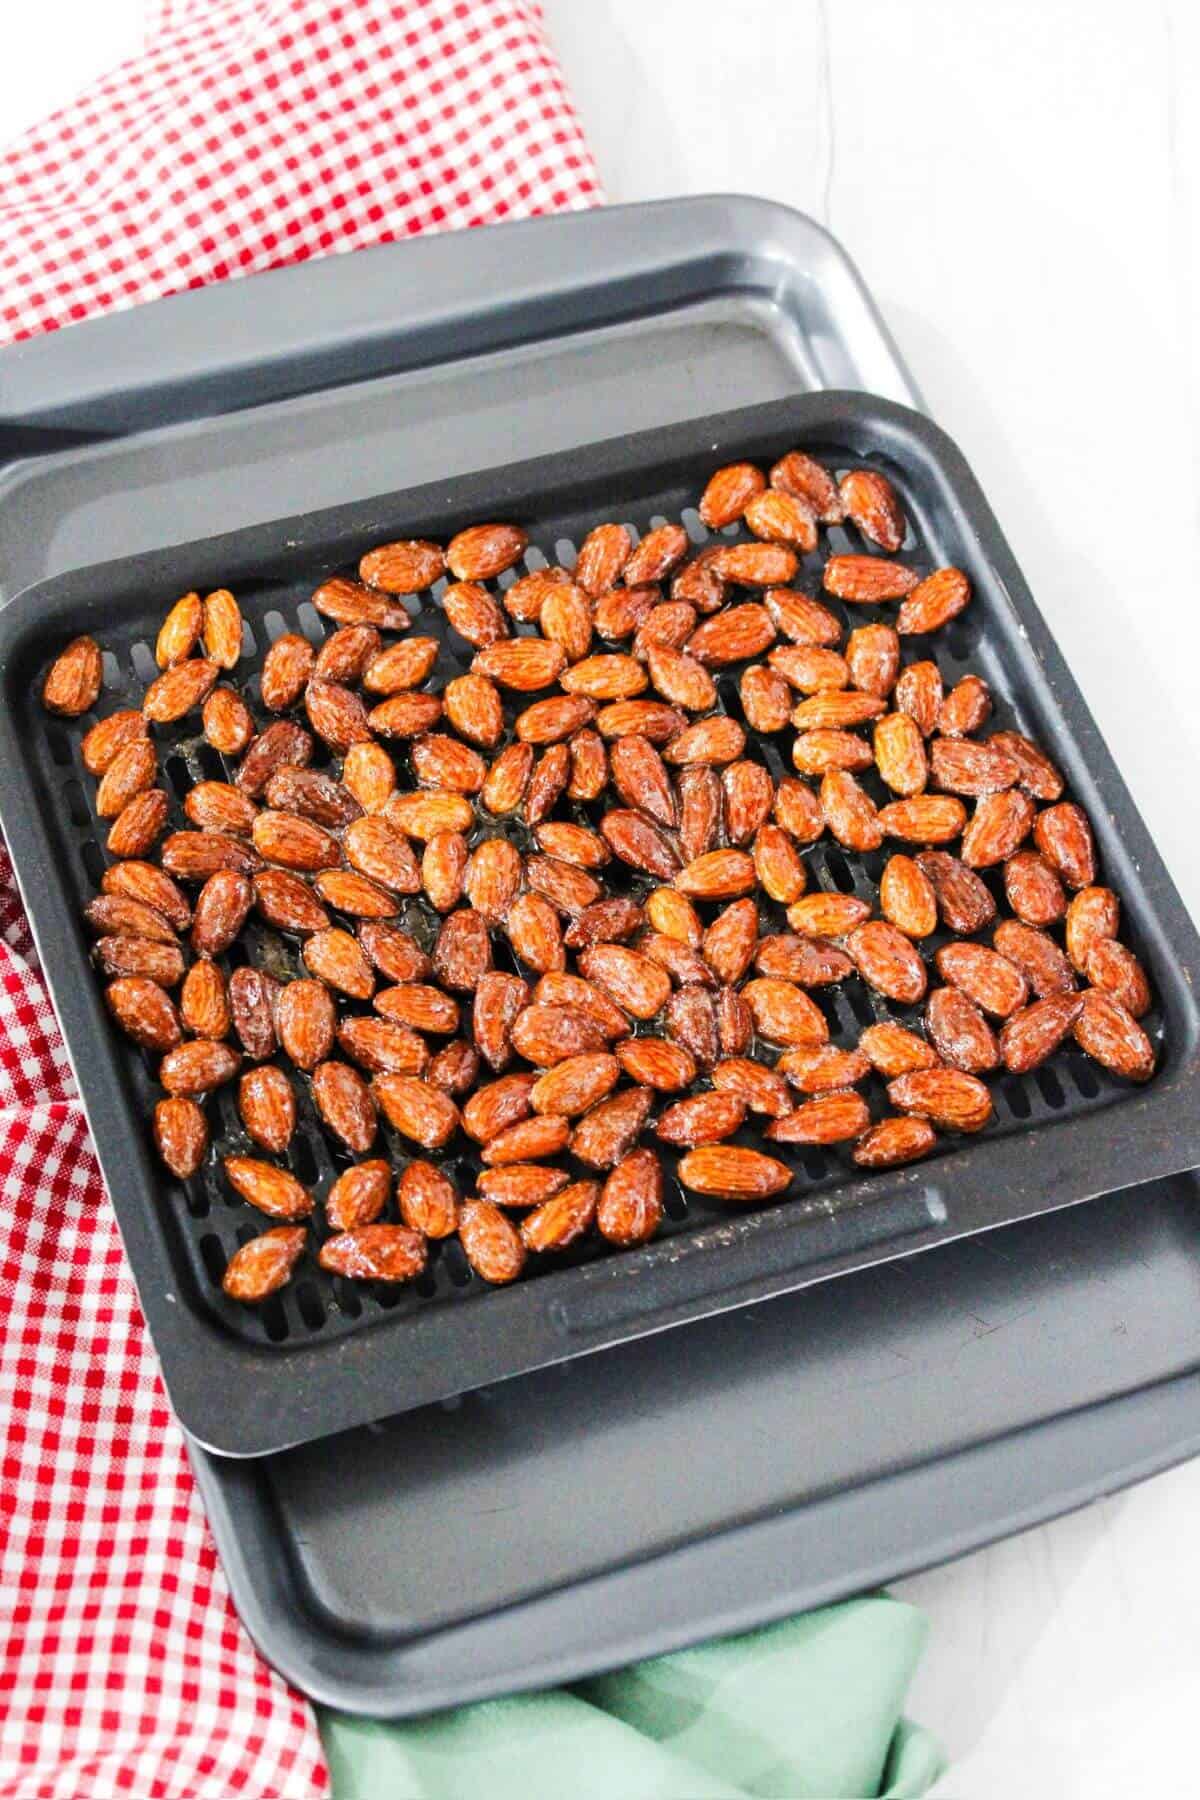 Candied almonds before cooking arranged in a baking pan on a red and white checkered tablecloth.